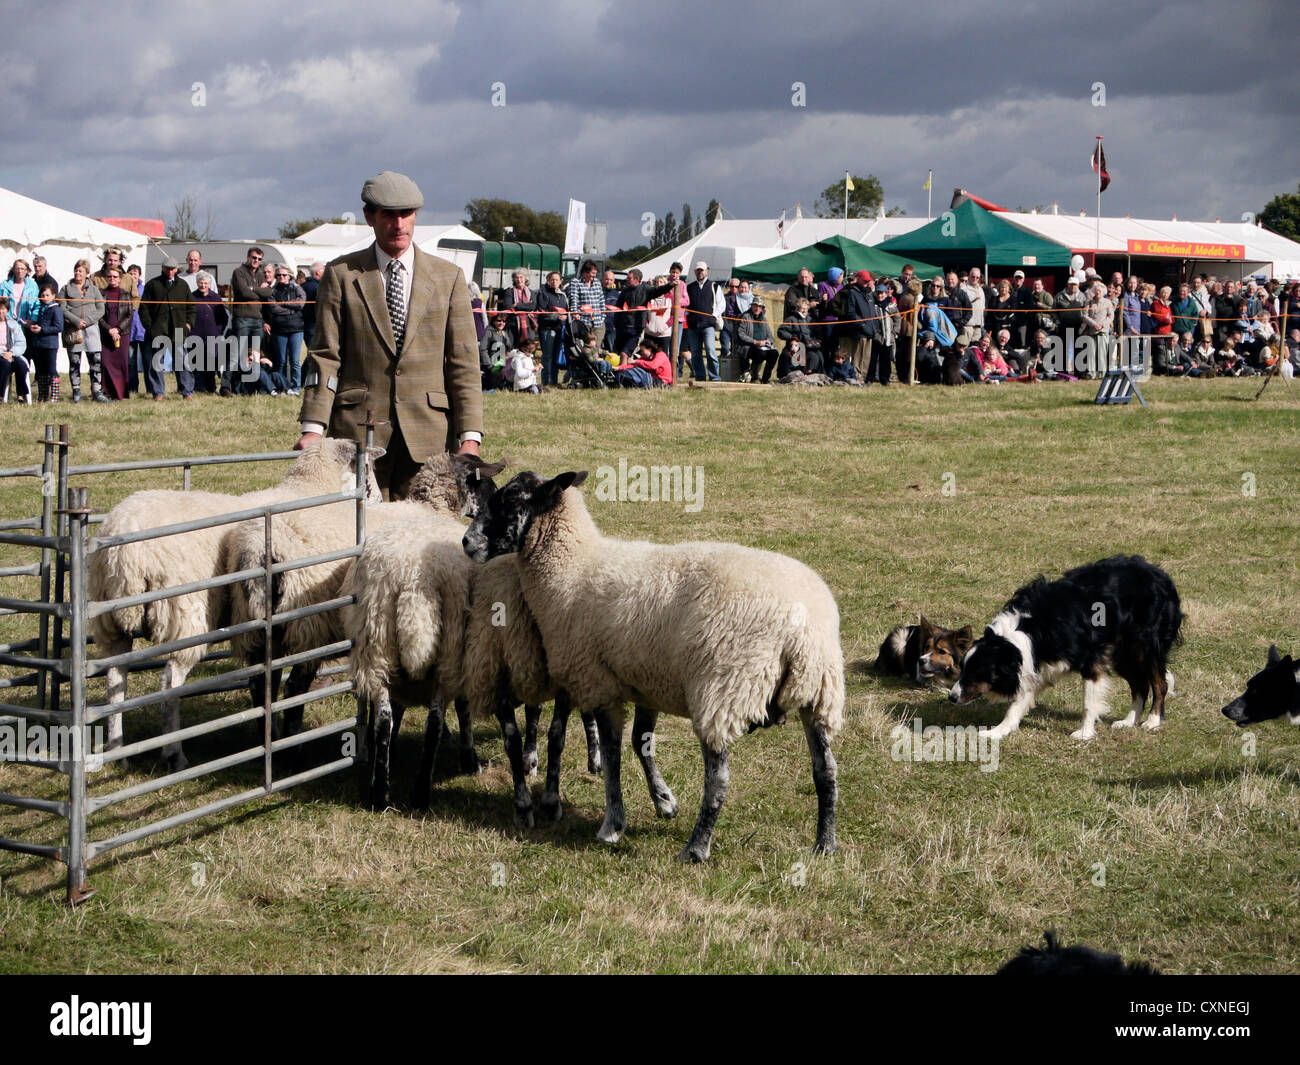 Penned In Sheep Stock Photos & Penned In Sheep Stock Images - Alamy